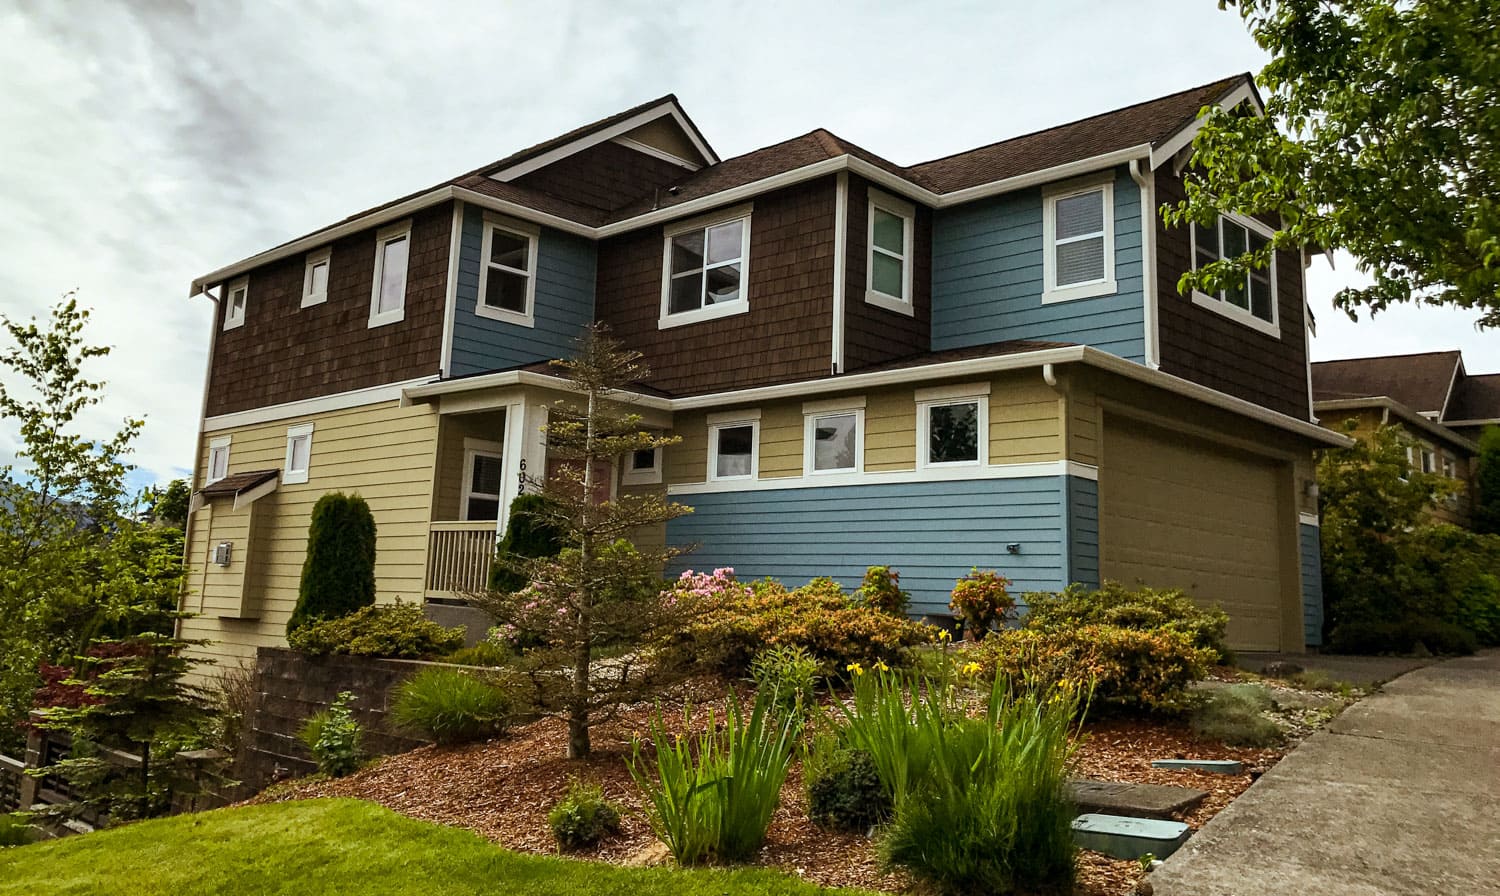 House painting in Issaquah, WA